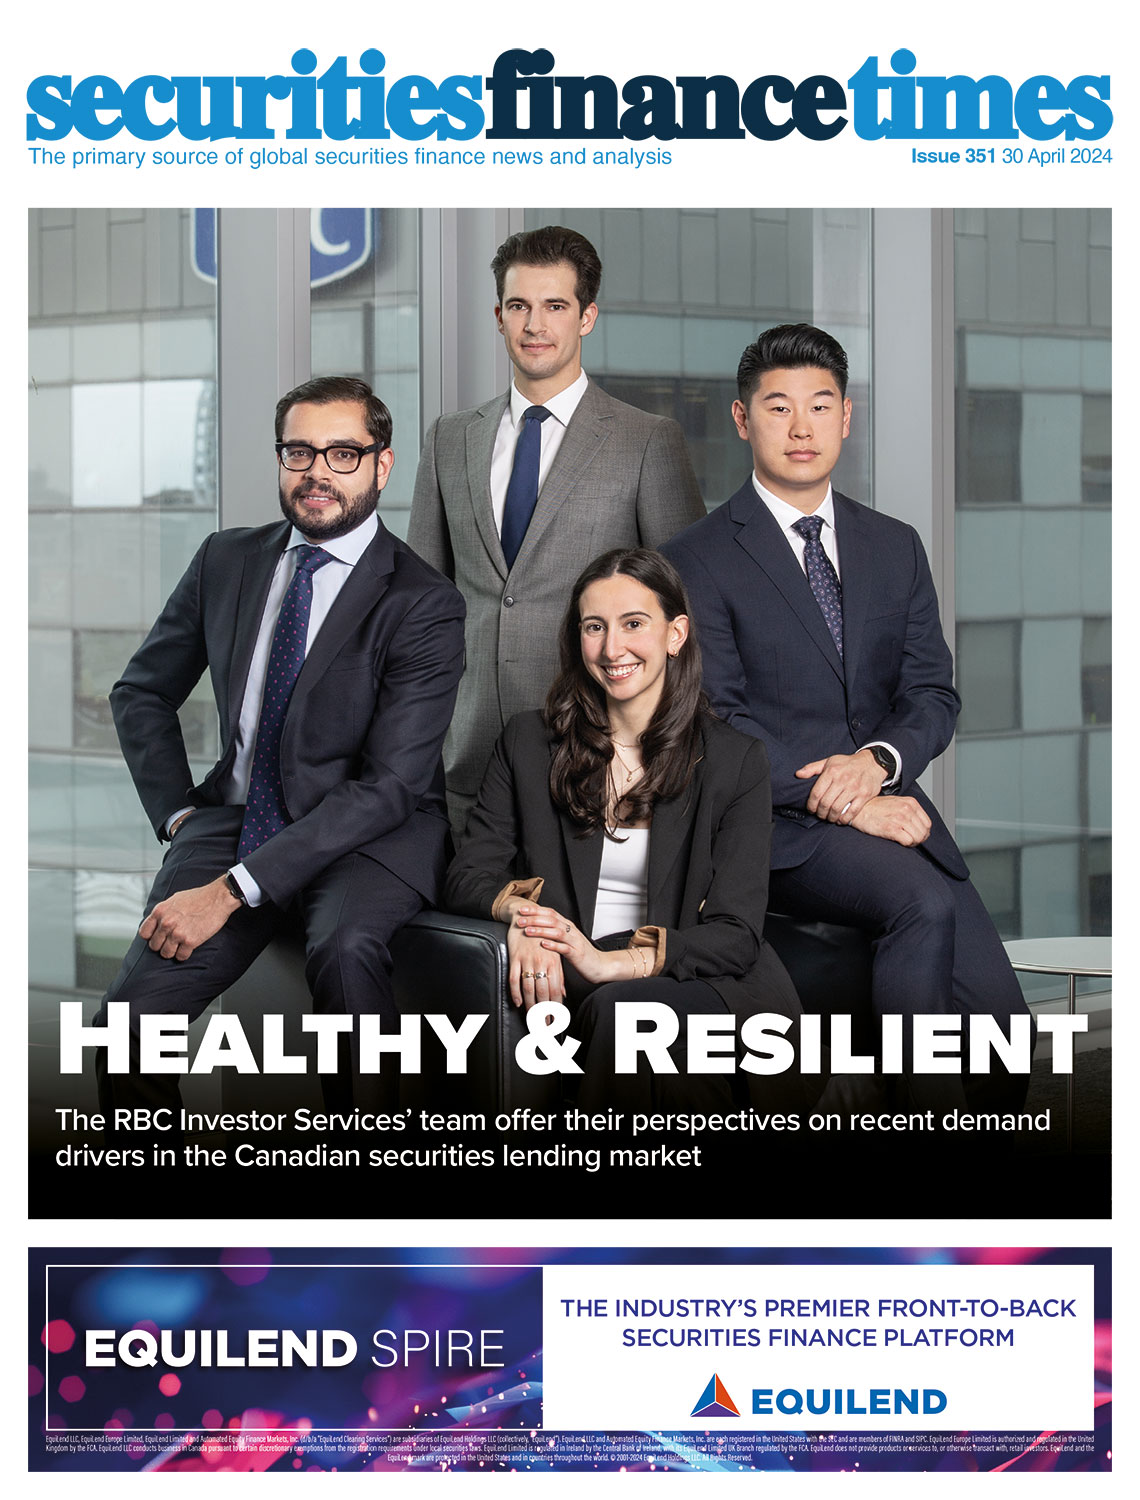 Securities Lending Times issue front cover